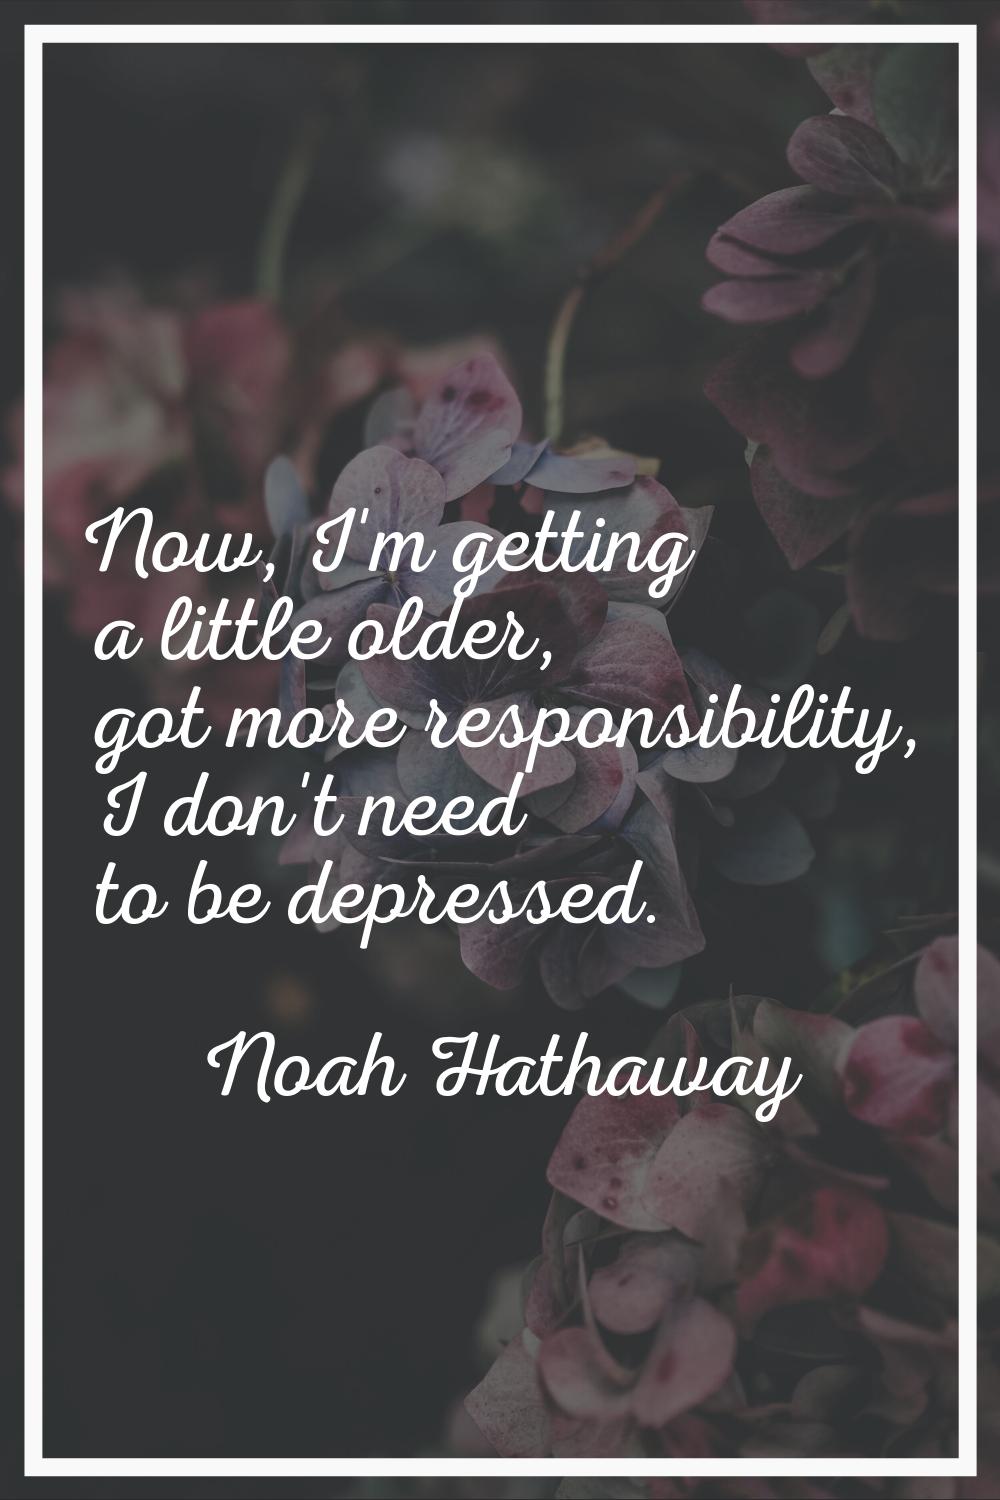 Now, I'm getting a little older, got more responsibility, I don't need to be depressed.